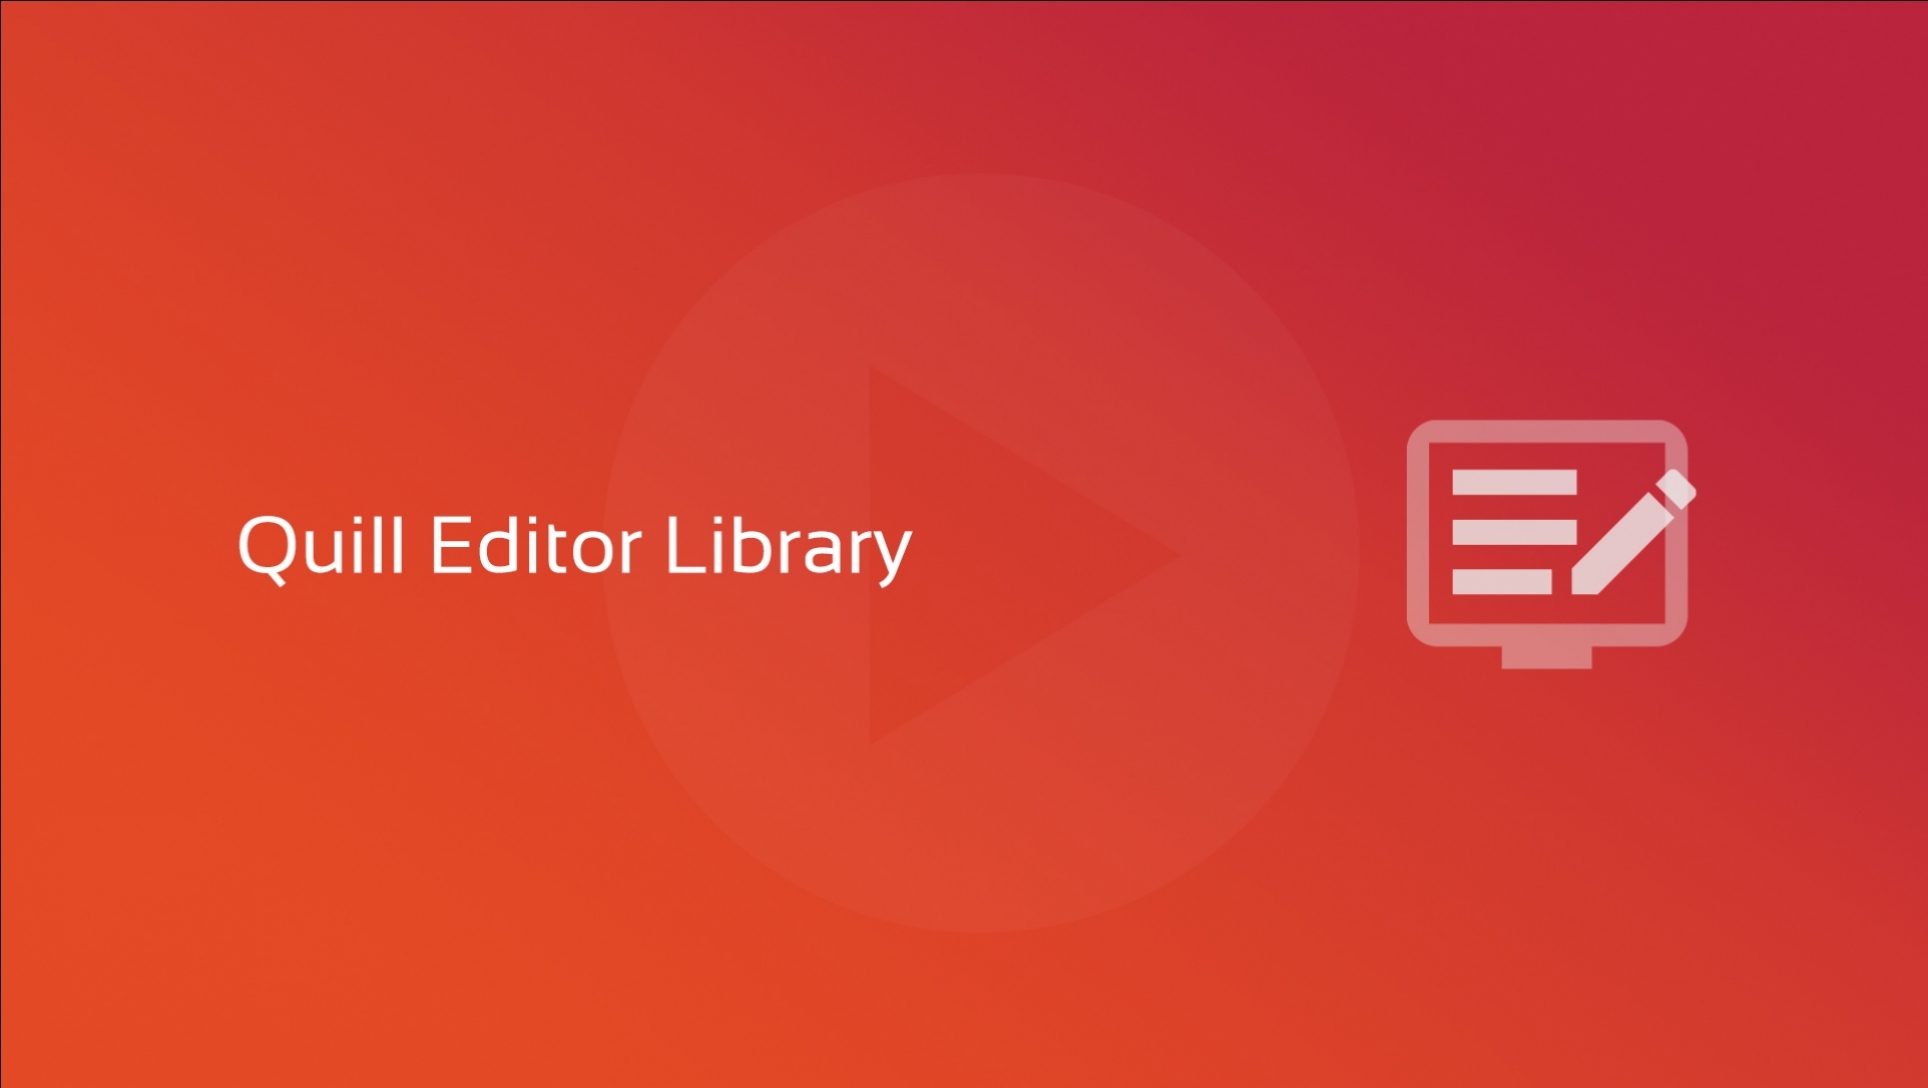 New video course: Quill Editor